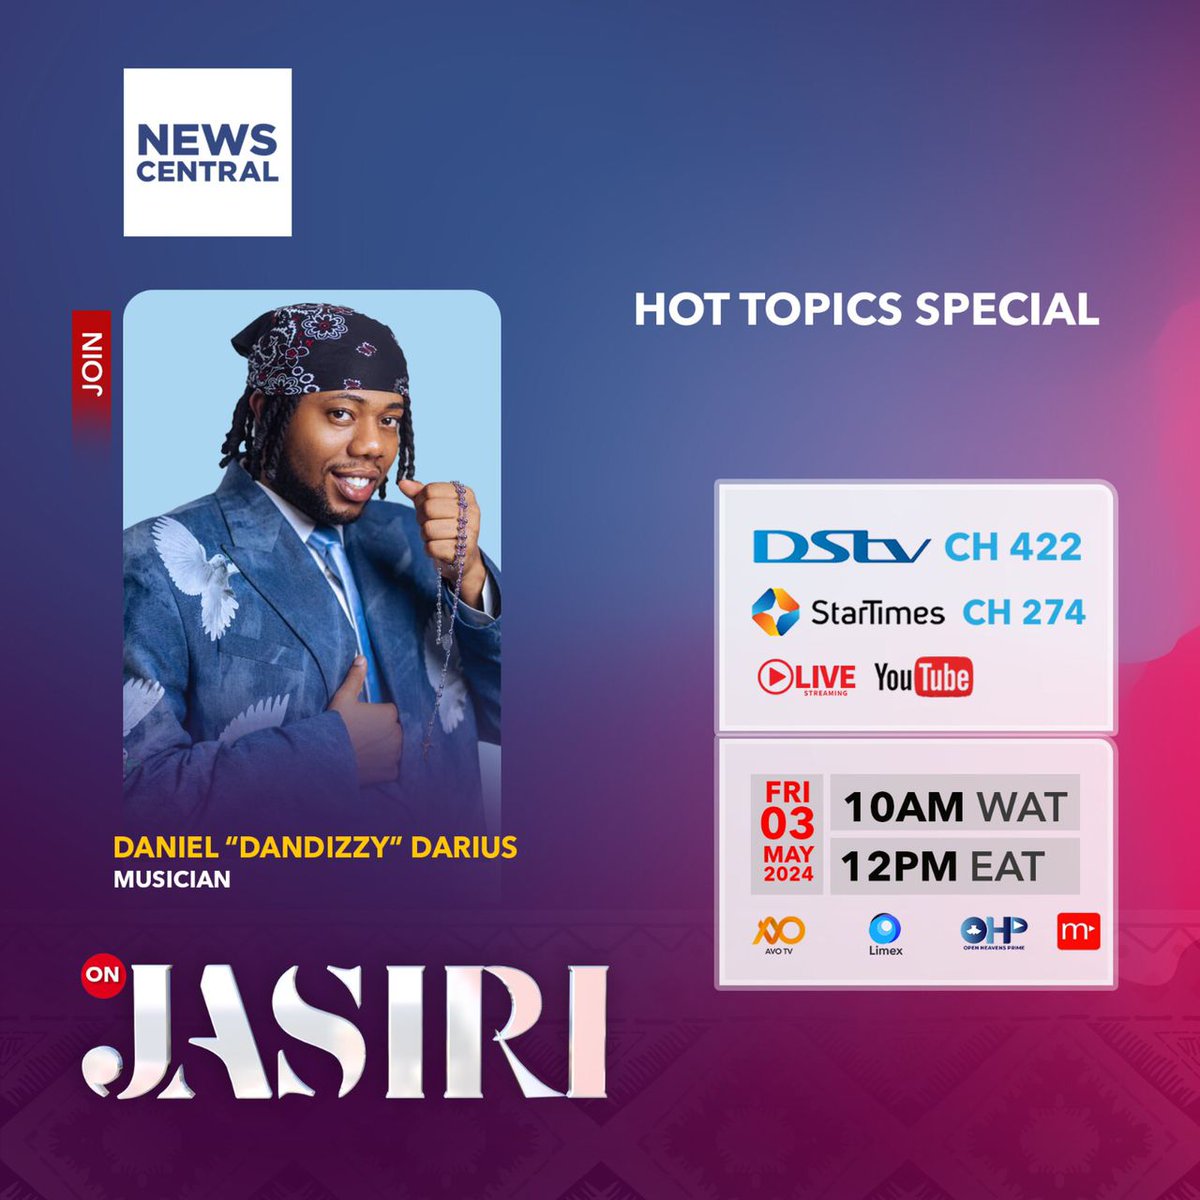 Get your weekend started right! Join the ladies of Jasiri for a Hot Topics special tomorrow at 10 AM WAT with music sensation @iDanDizzy. Watch live on DSTV channel 422, Startimes channel 274, or streaming on our social media platforms.